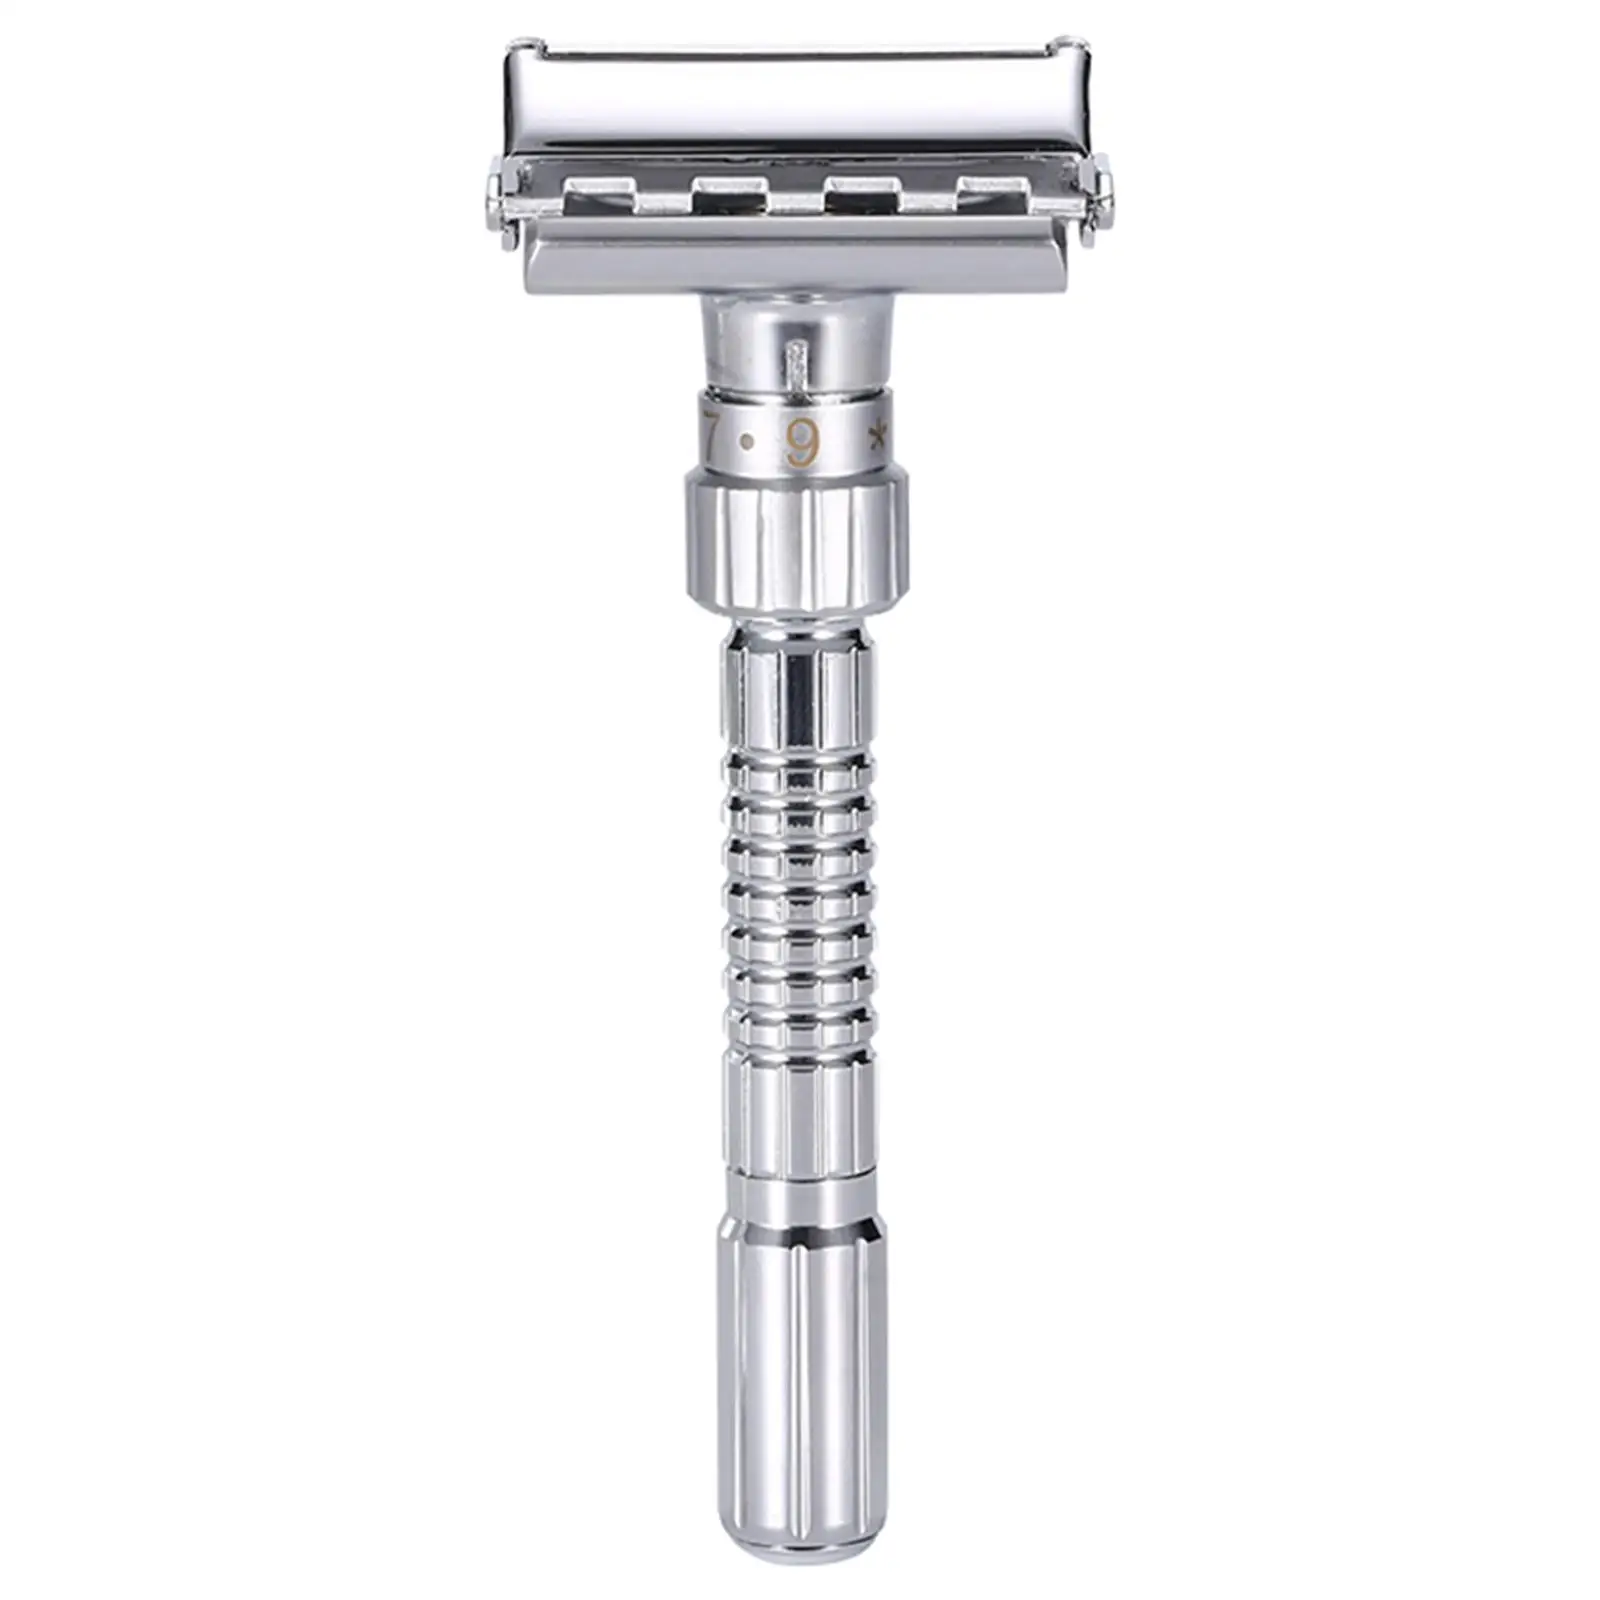 Manual  Safety  with 5 , Plated Eco Friendly Reusable, Adjustable Shaving  Barbershop, Travel